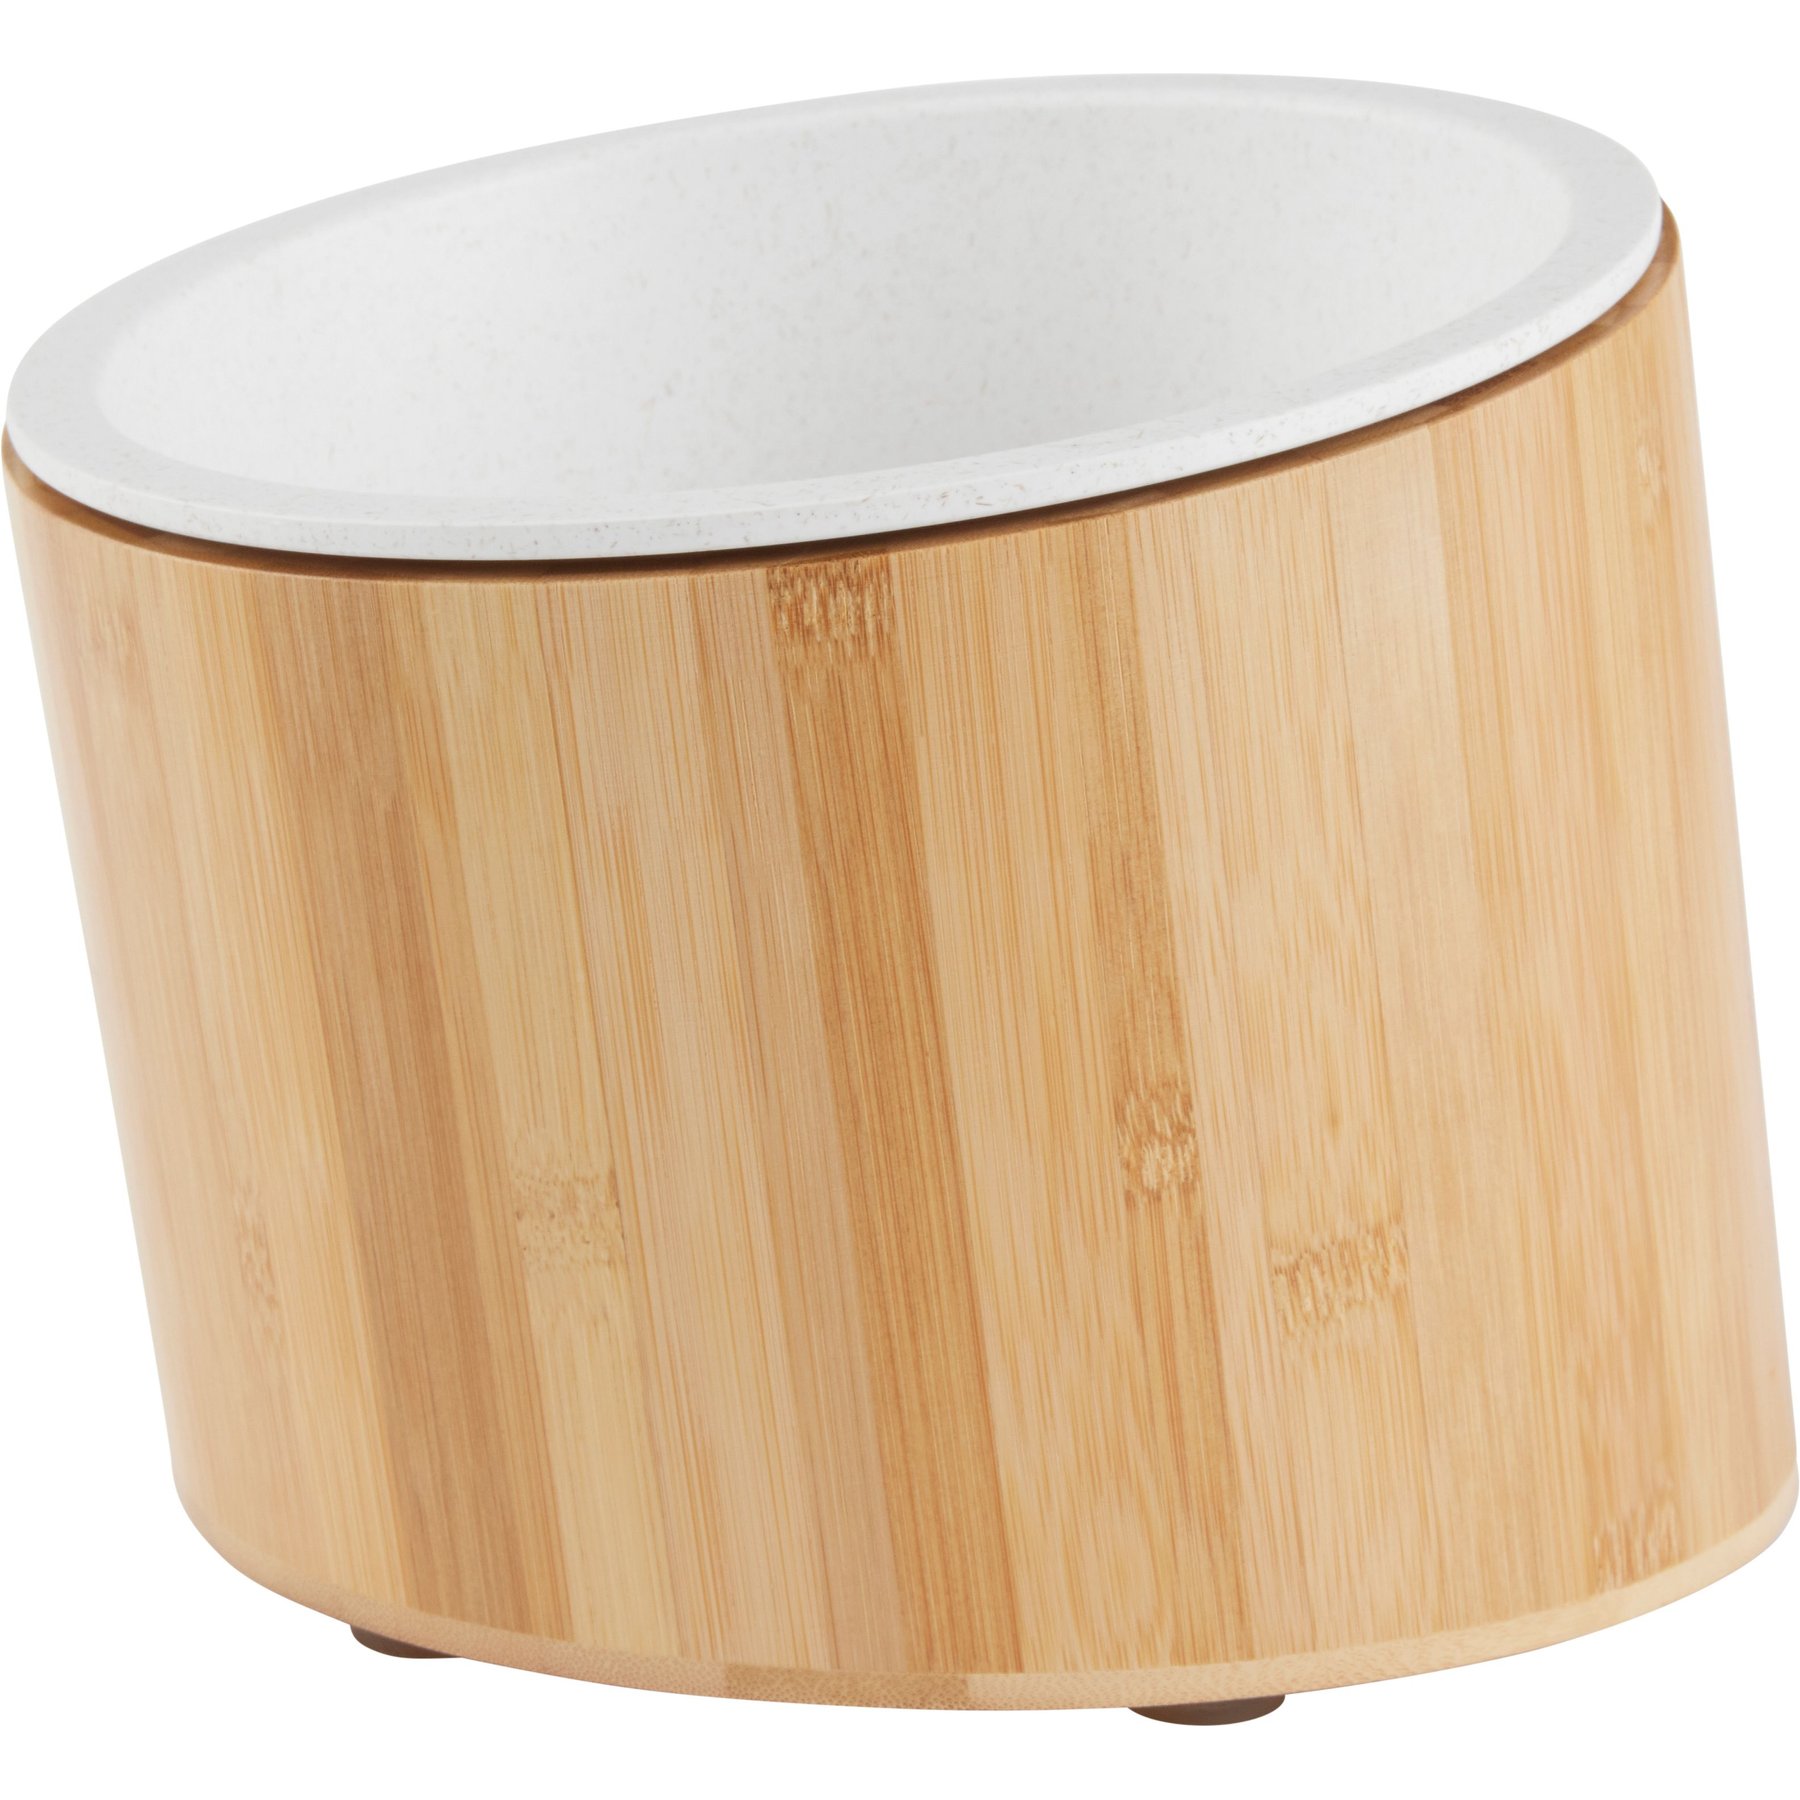 Elevated Dog Bowls with Stand - 7-Inch Nonslip Bamboo Dog Feeder